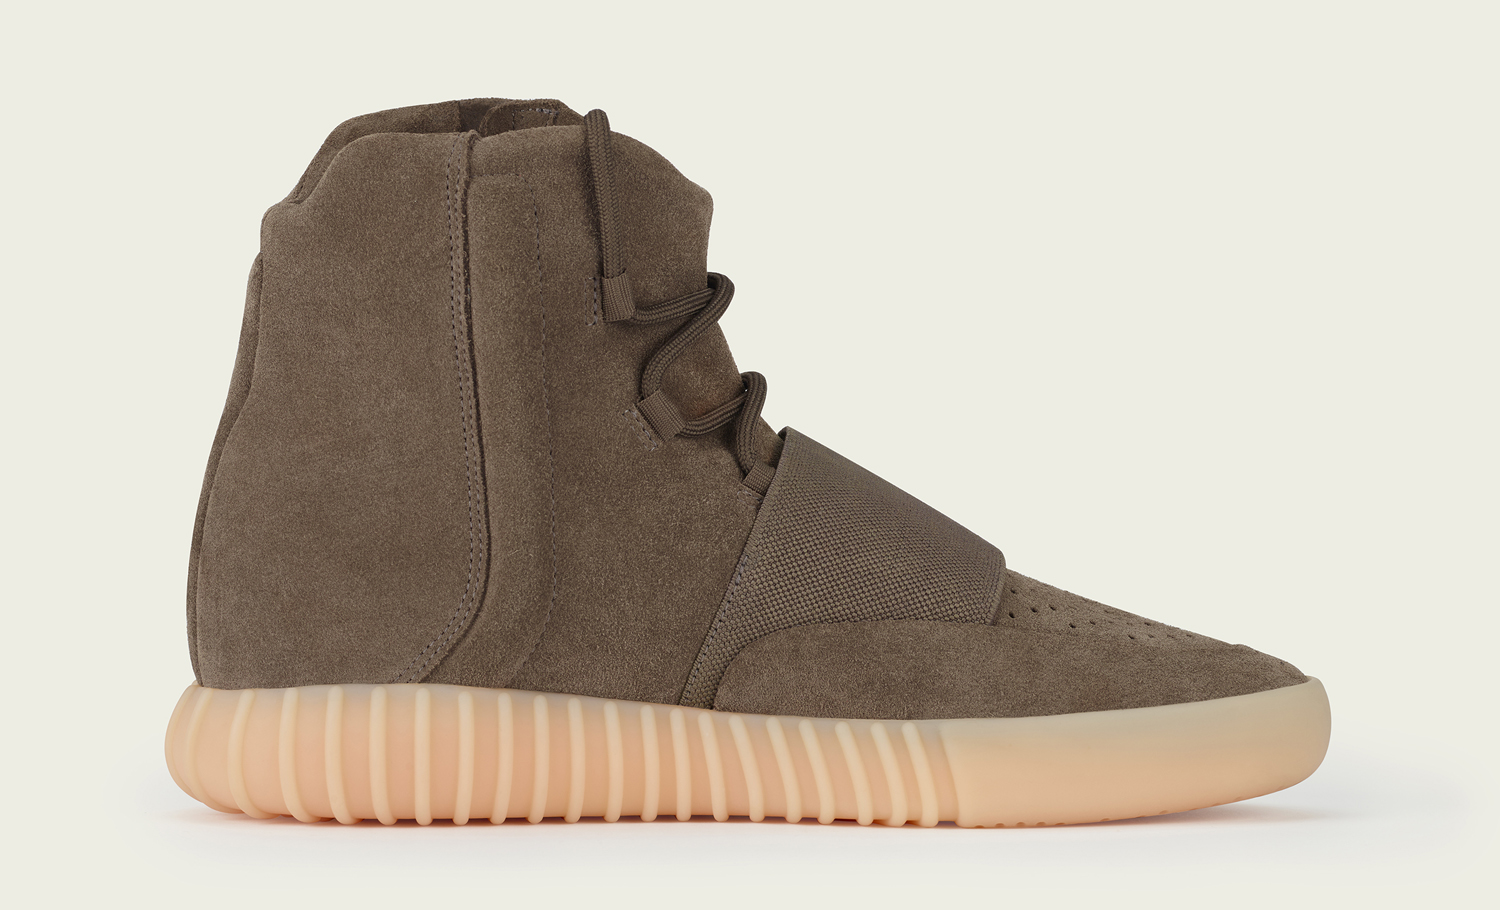 Where to Buy the Yeezy Boost 750 Chocolate Store Listing